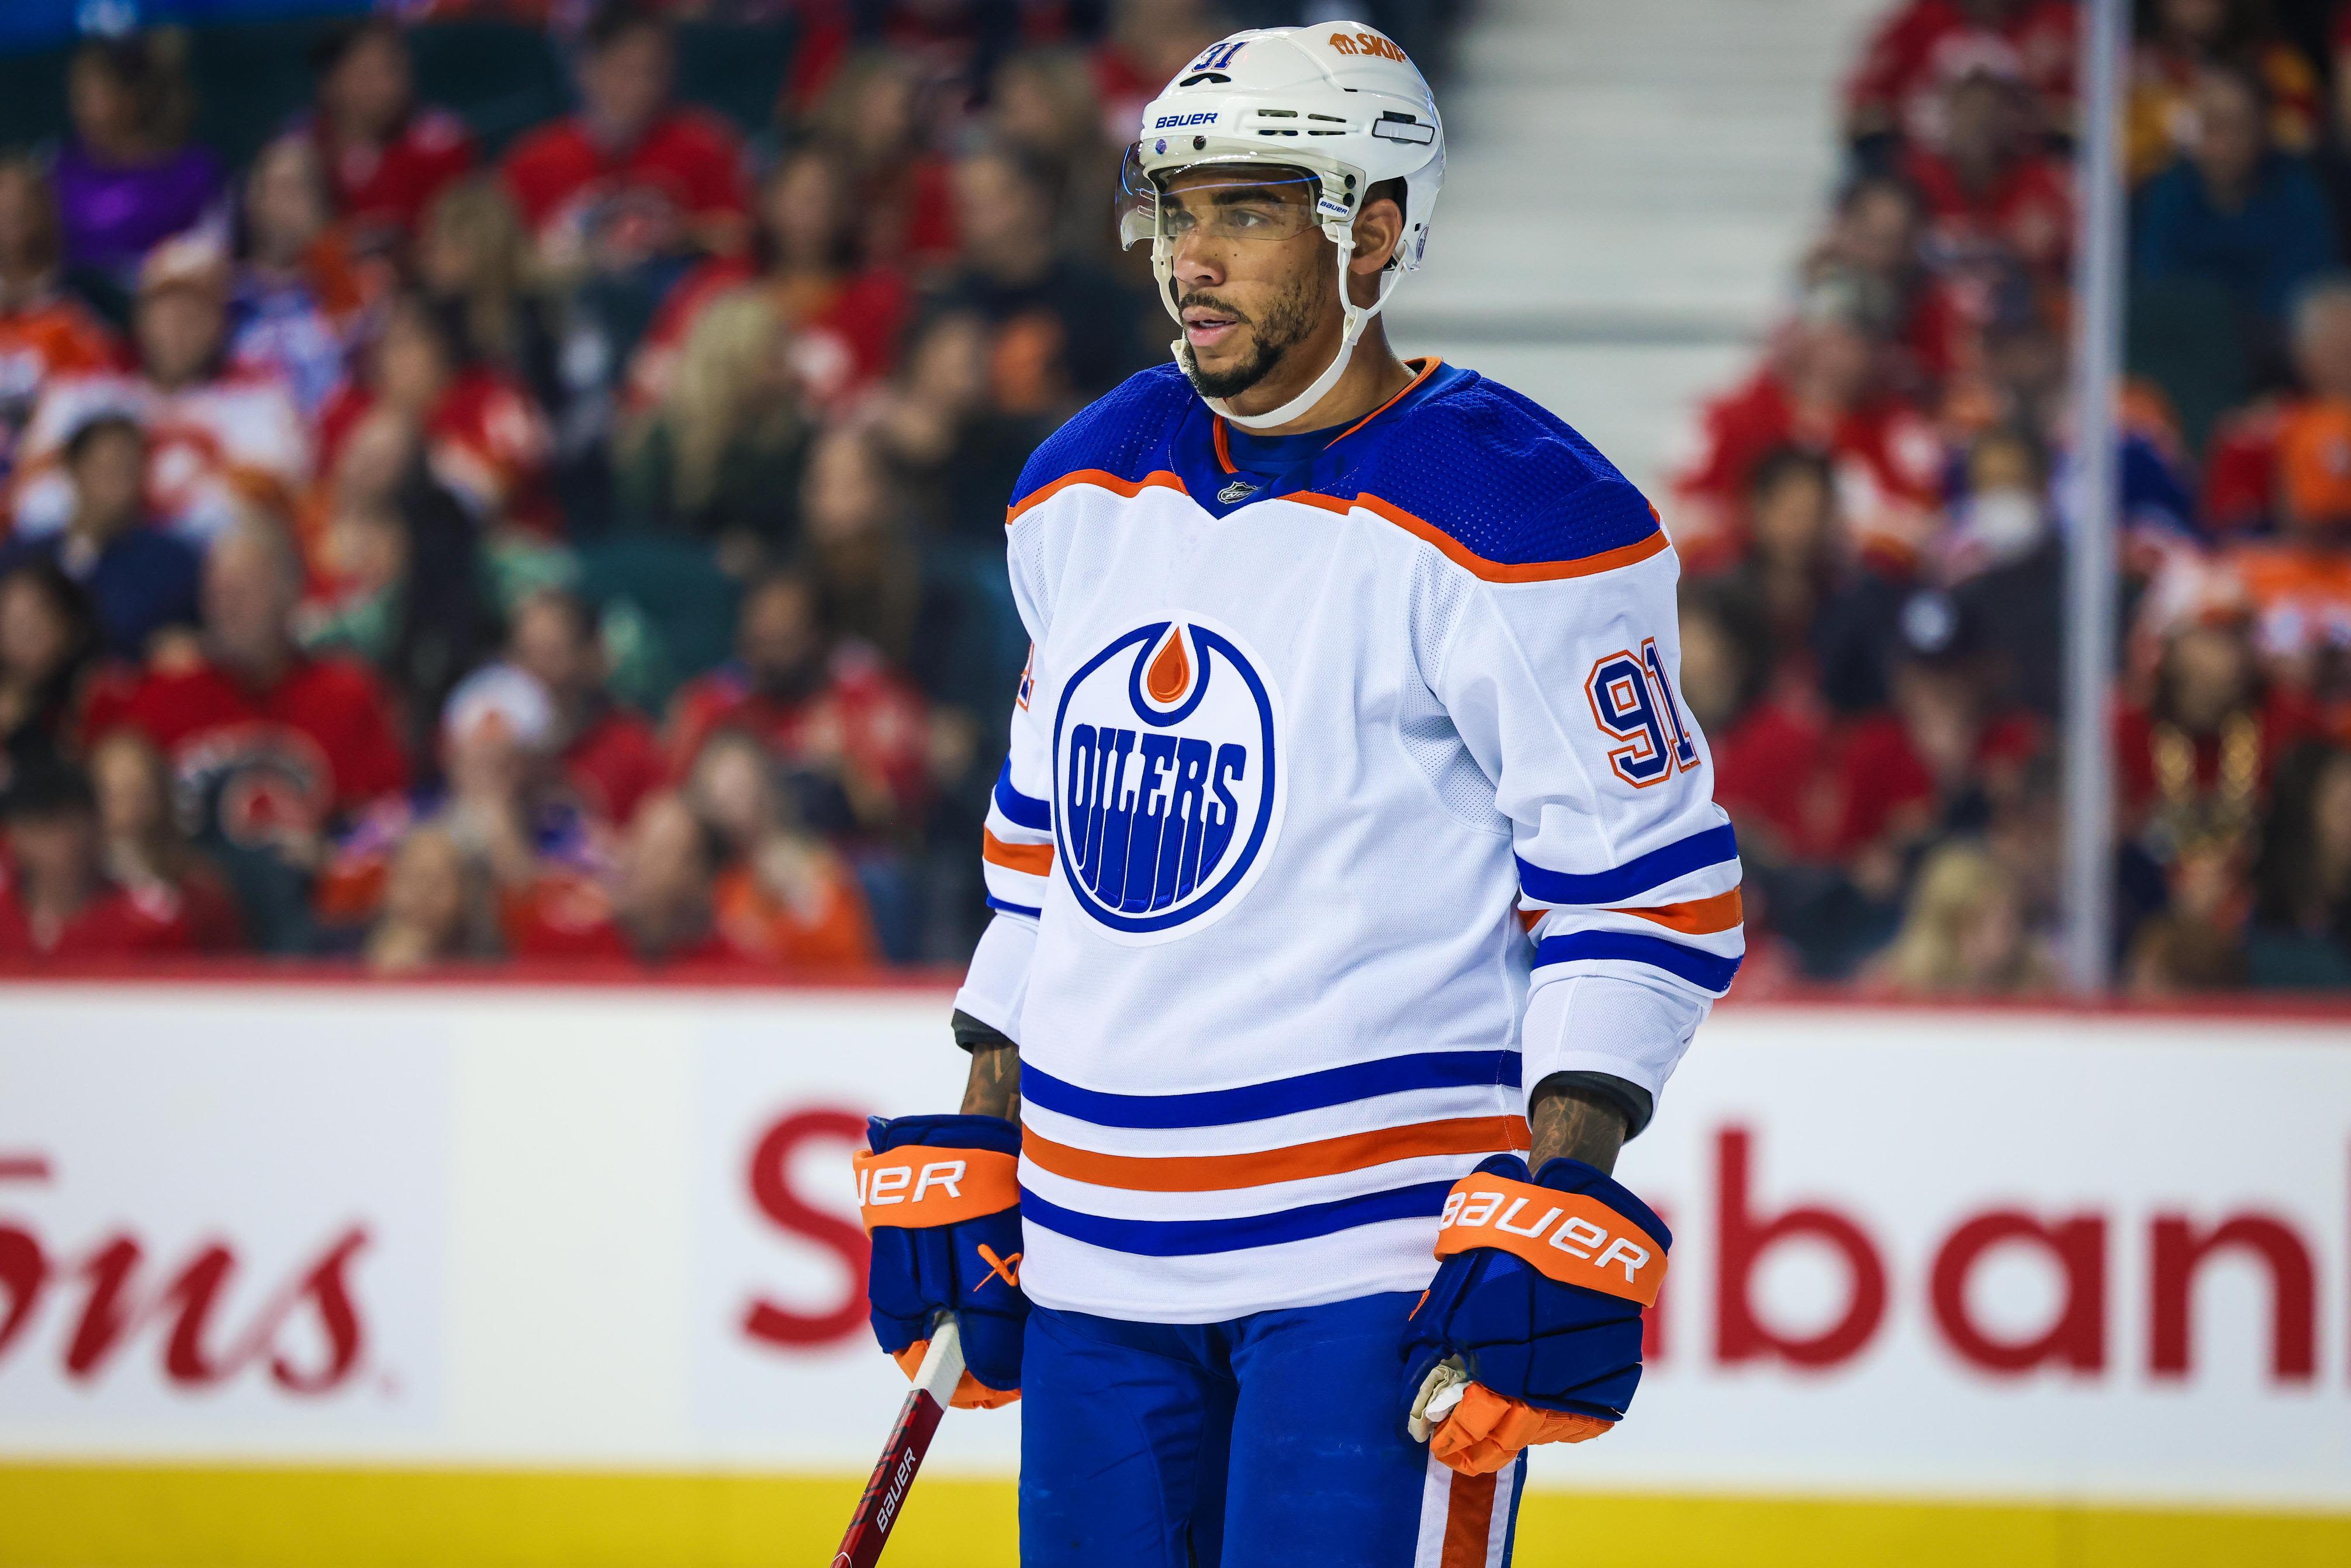 Evander Kane to miss months after skate cuts his wrist